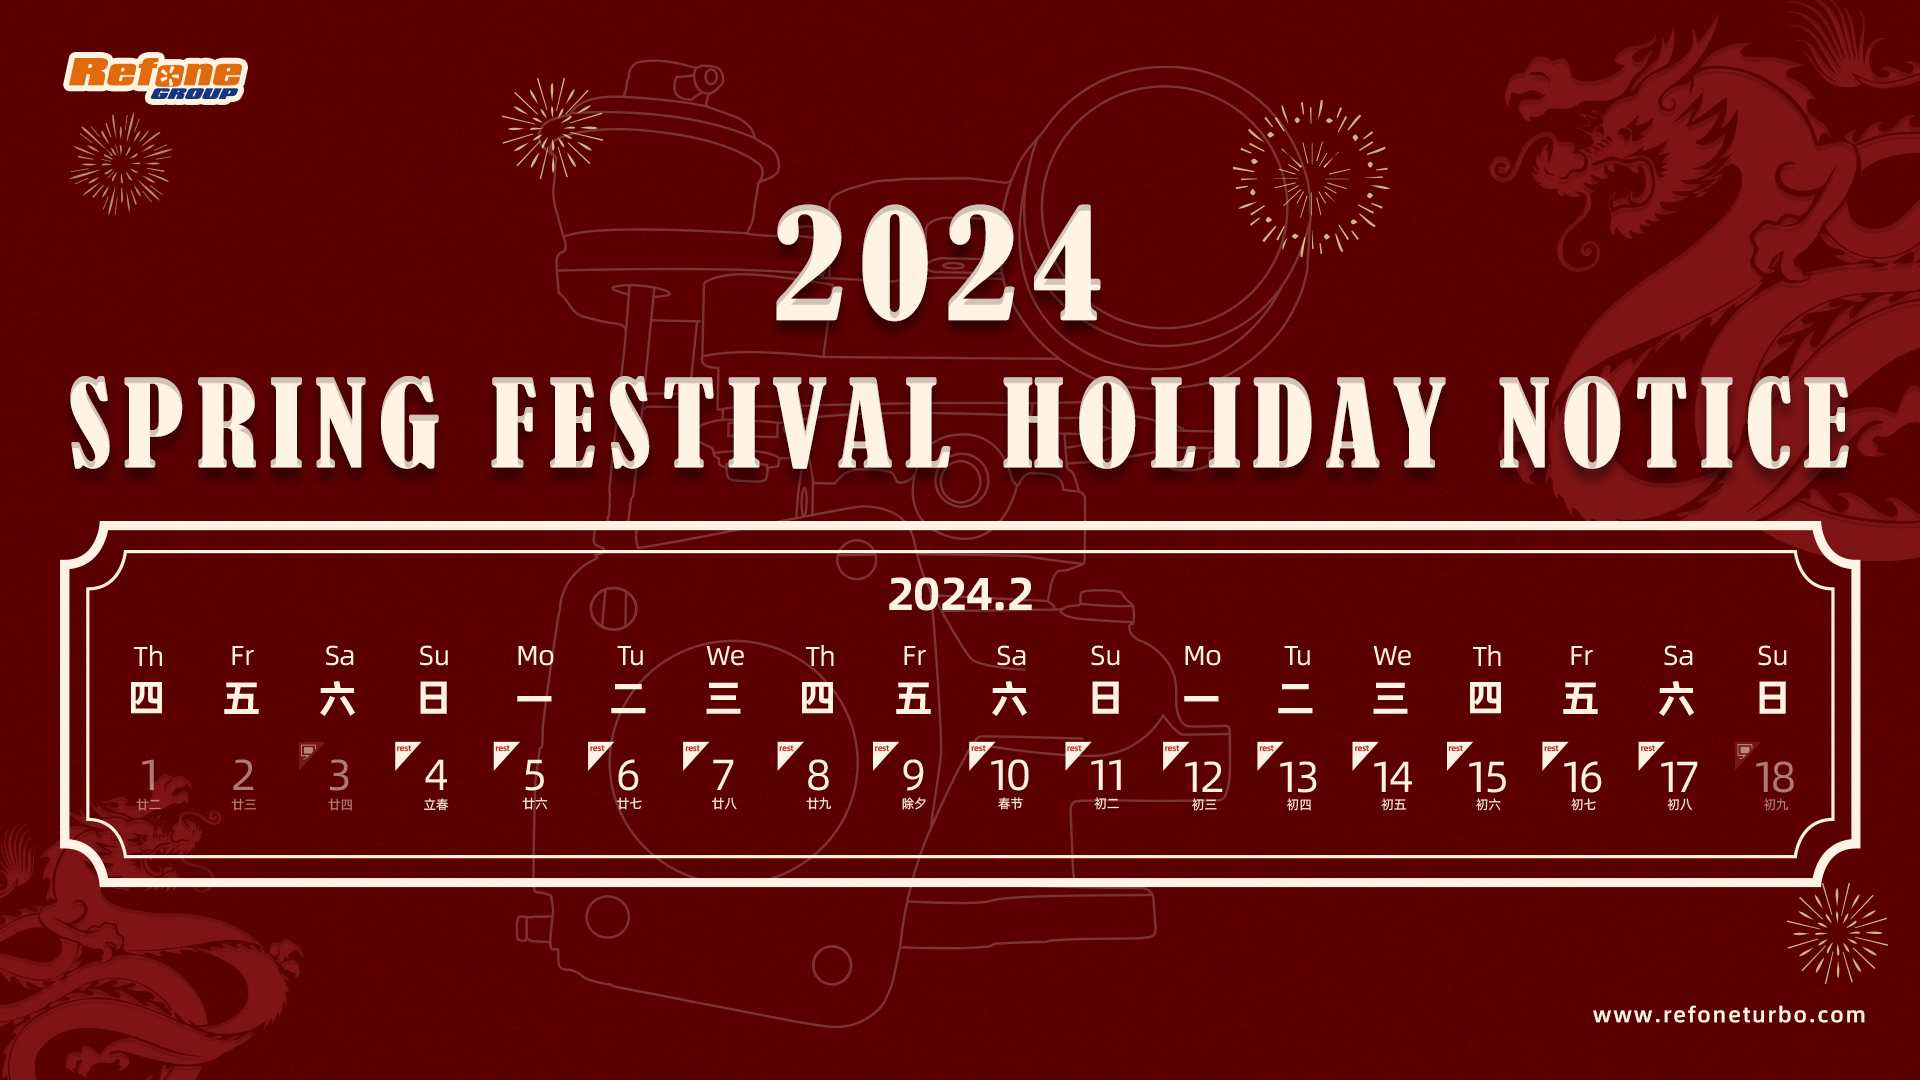 2024 Lunar New Year Holiday Notice